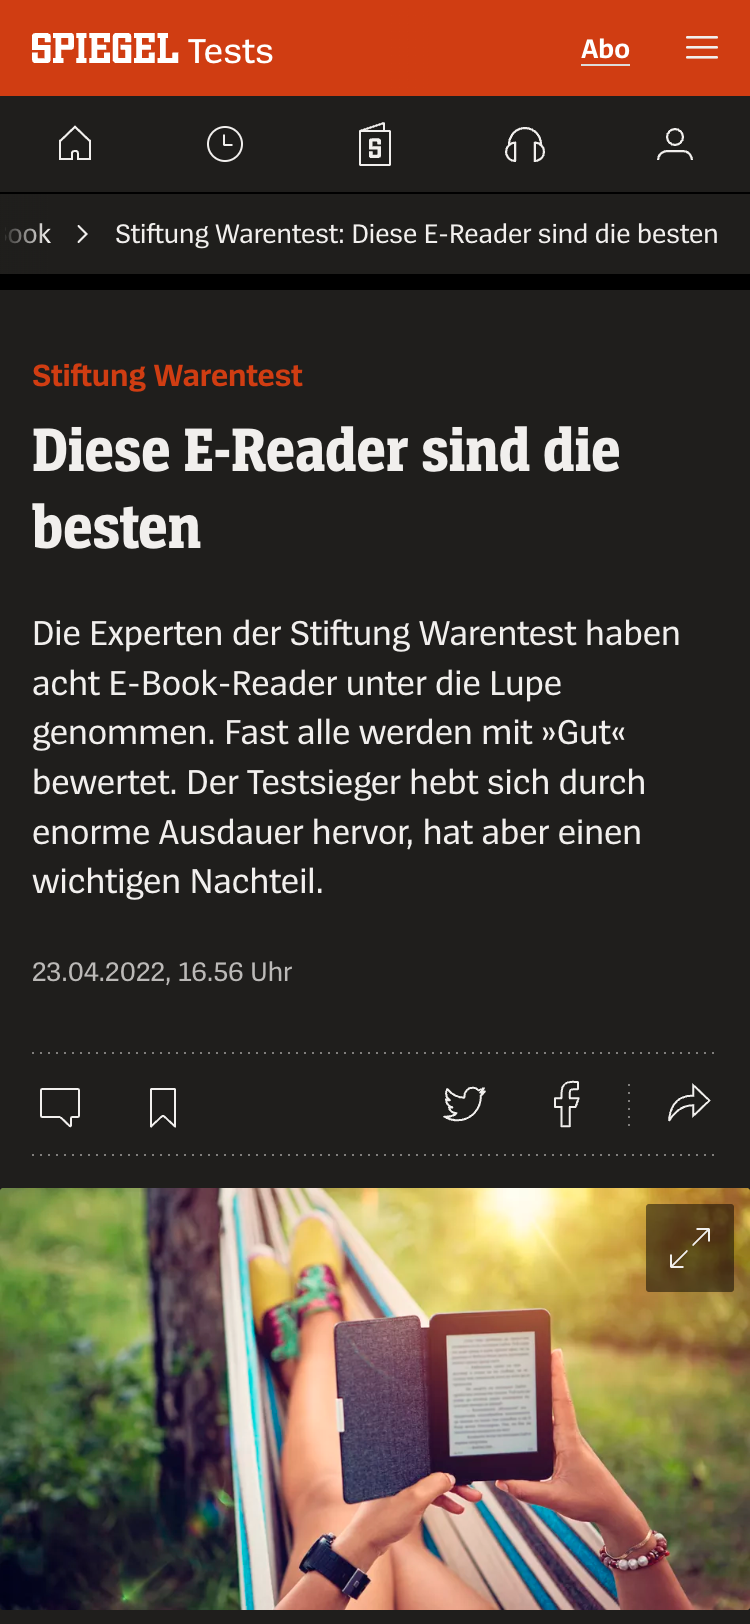 Mobile screenshot of an article on the Der Spiegel website. The header contains the Spiegel logo and a menu button. There is also a row of icons for navigation, including a house icon for the home page. The article title is followed a summary paragraph, a row of social media icons, and a full-width image.